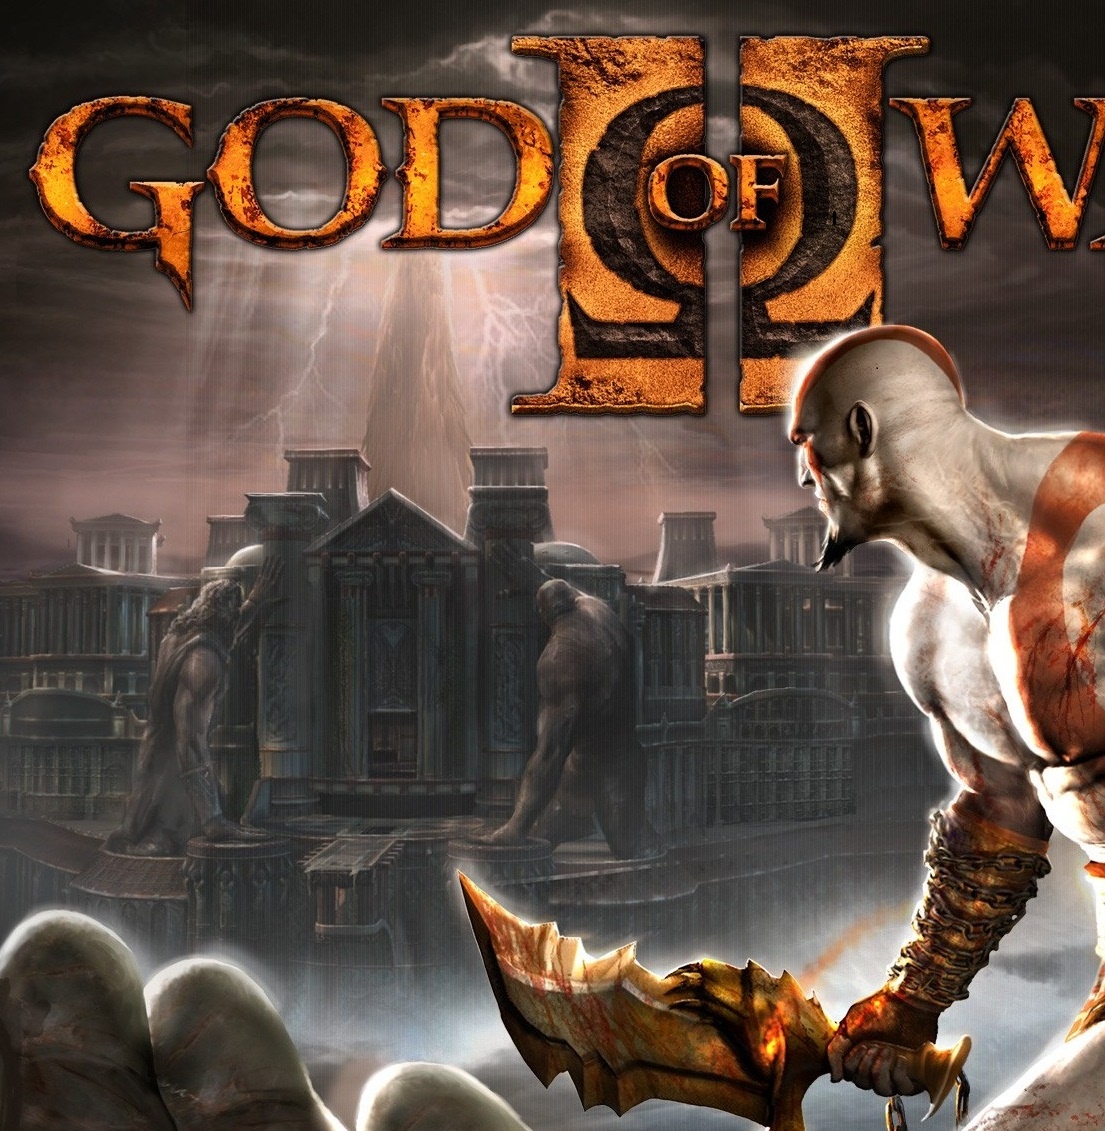 god of war 3 for ps2 iso